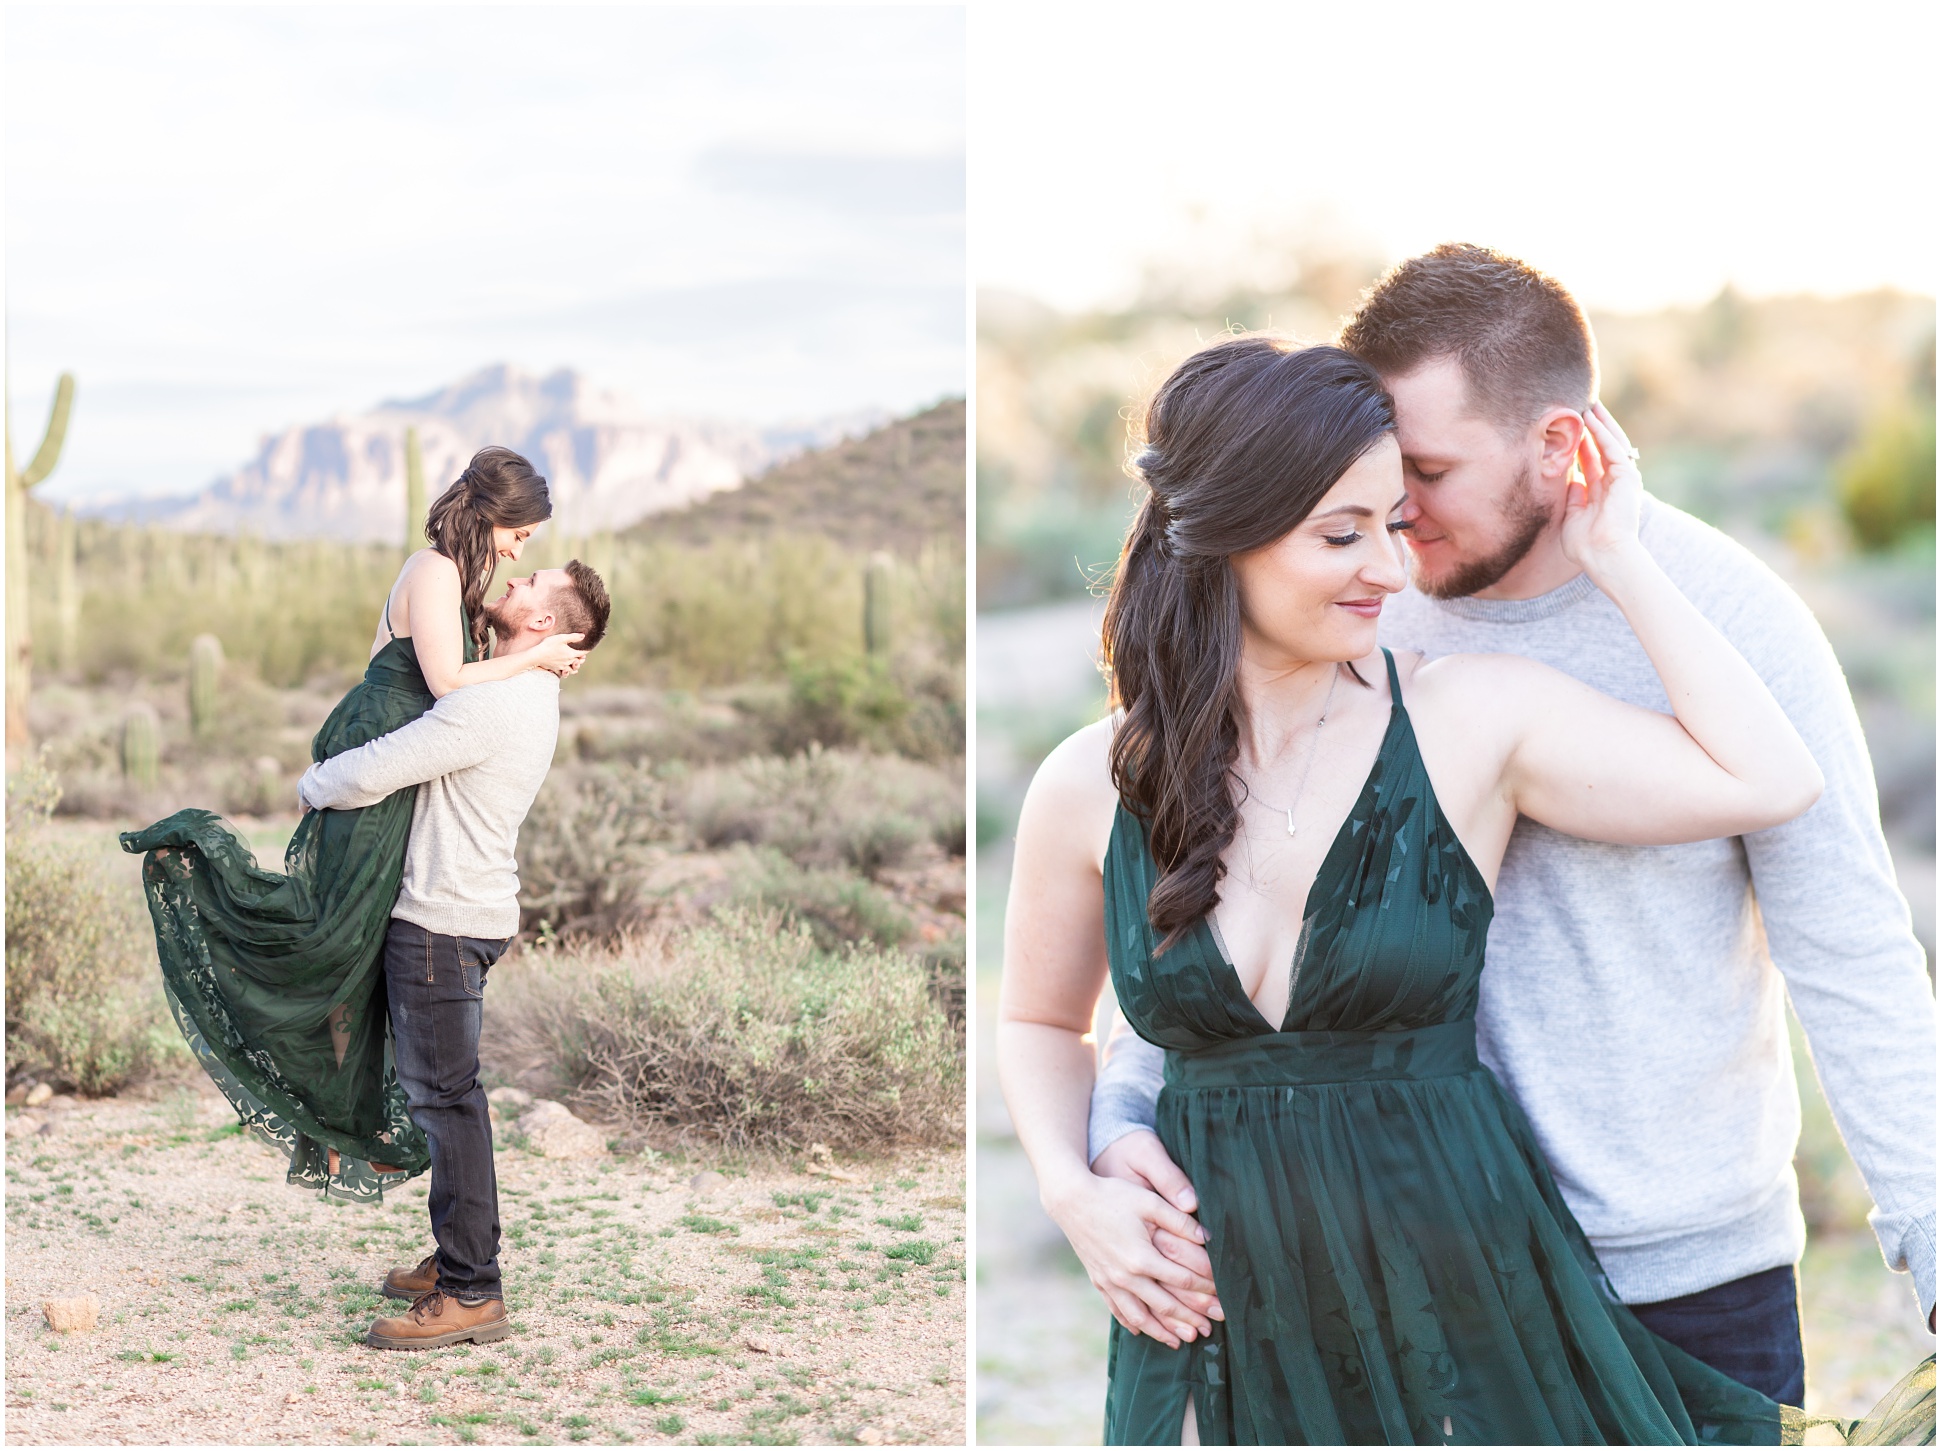 Left Image: Jake lifting Kaila in front of Supersticious Mountains, Right Image, Jake nuzzling into Kaila from behind